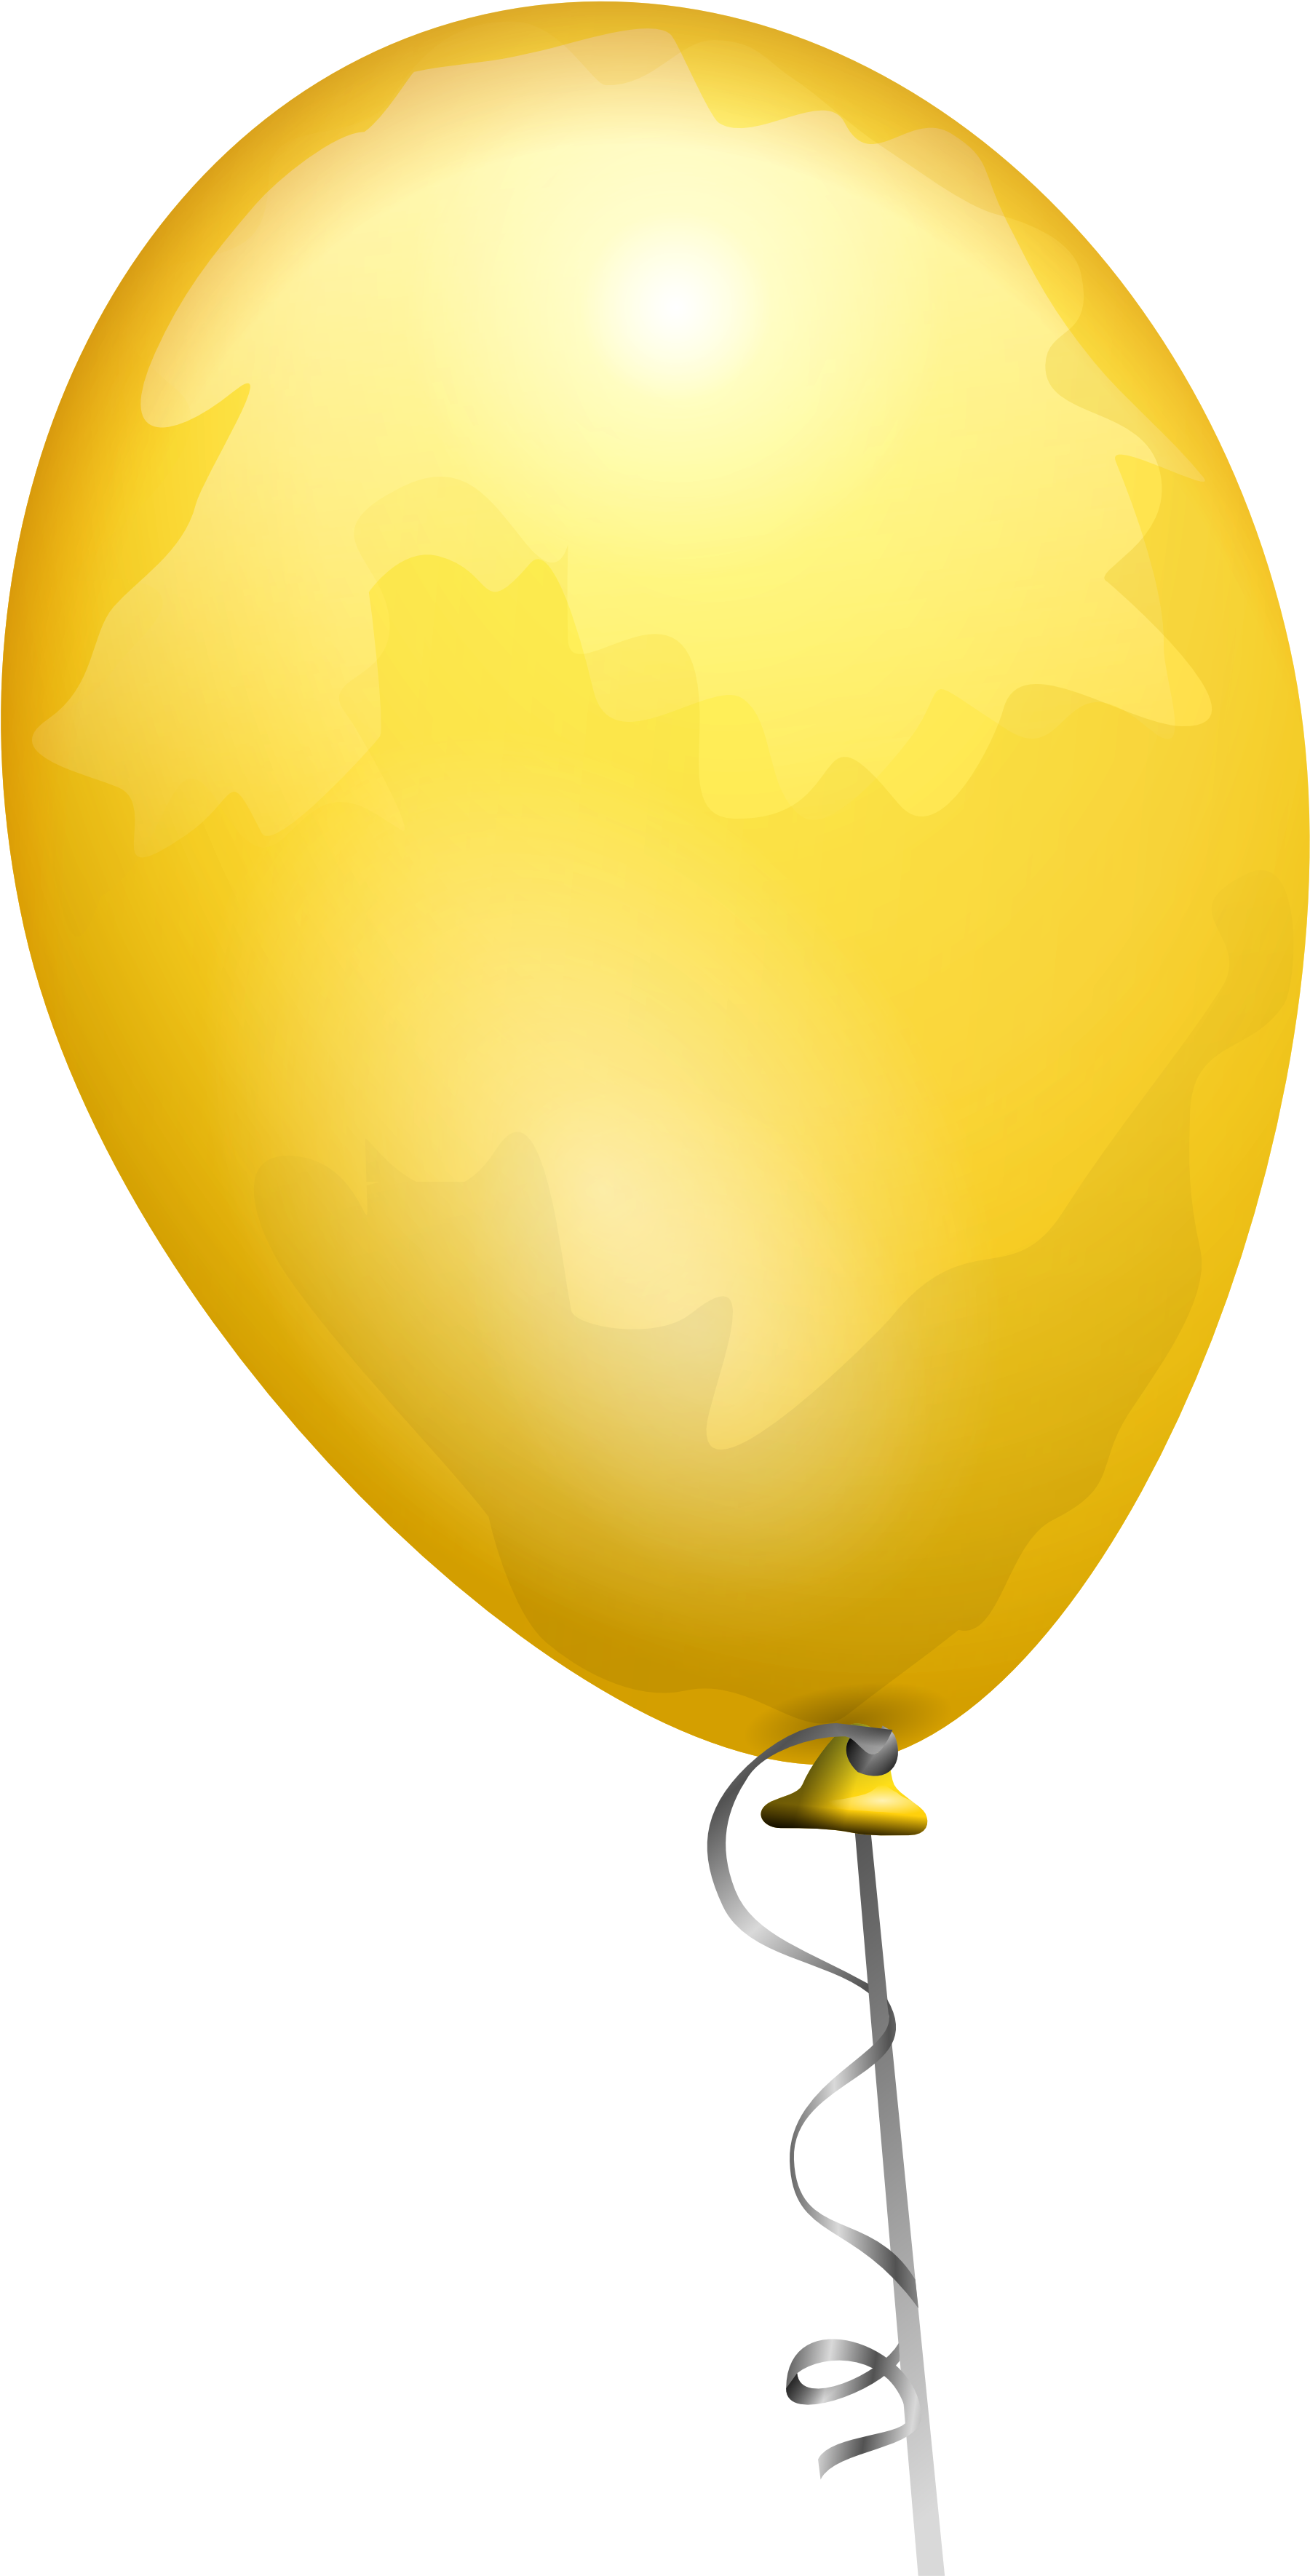 Balloon Png579 - Yellow Balloon Transparent Background (1969x3610)